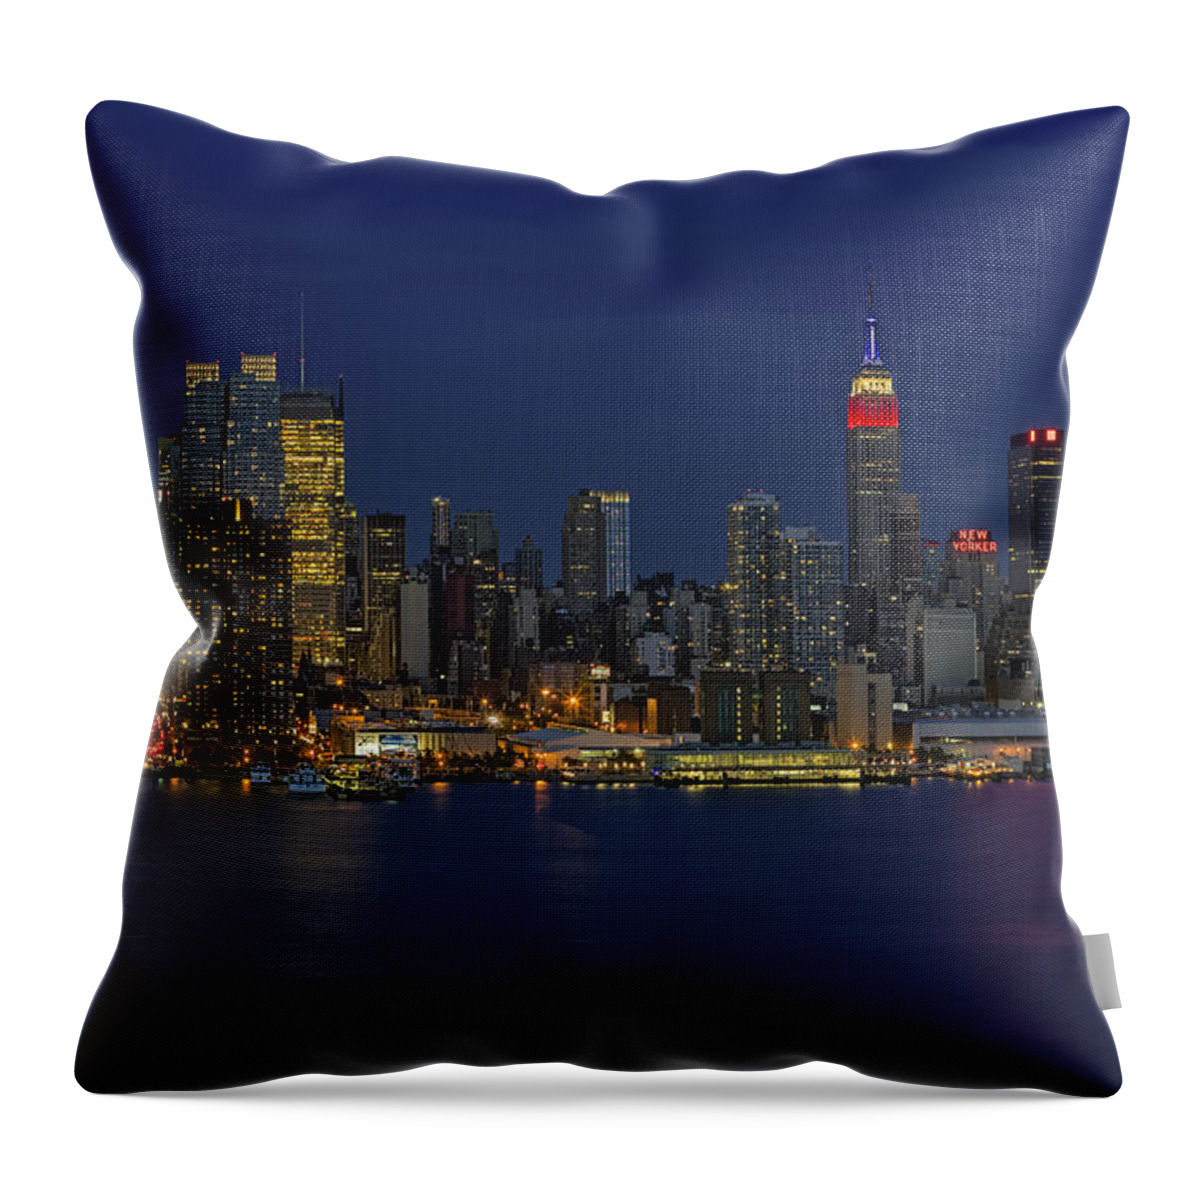 Esb Throw Pillow featuring the photograph New York City Lights by Susan Candelario